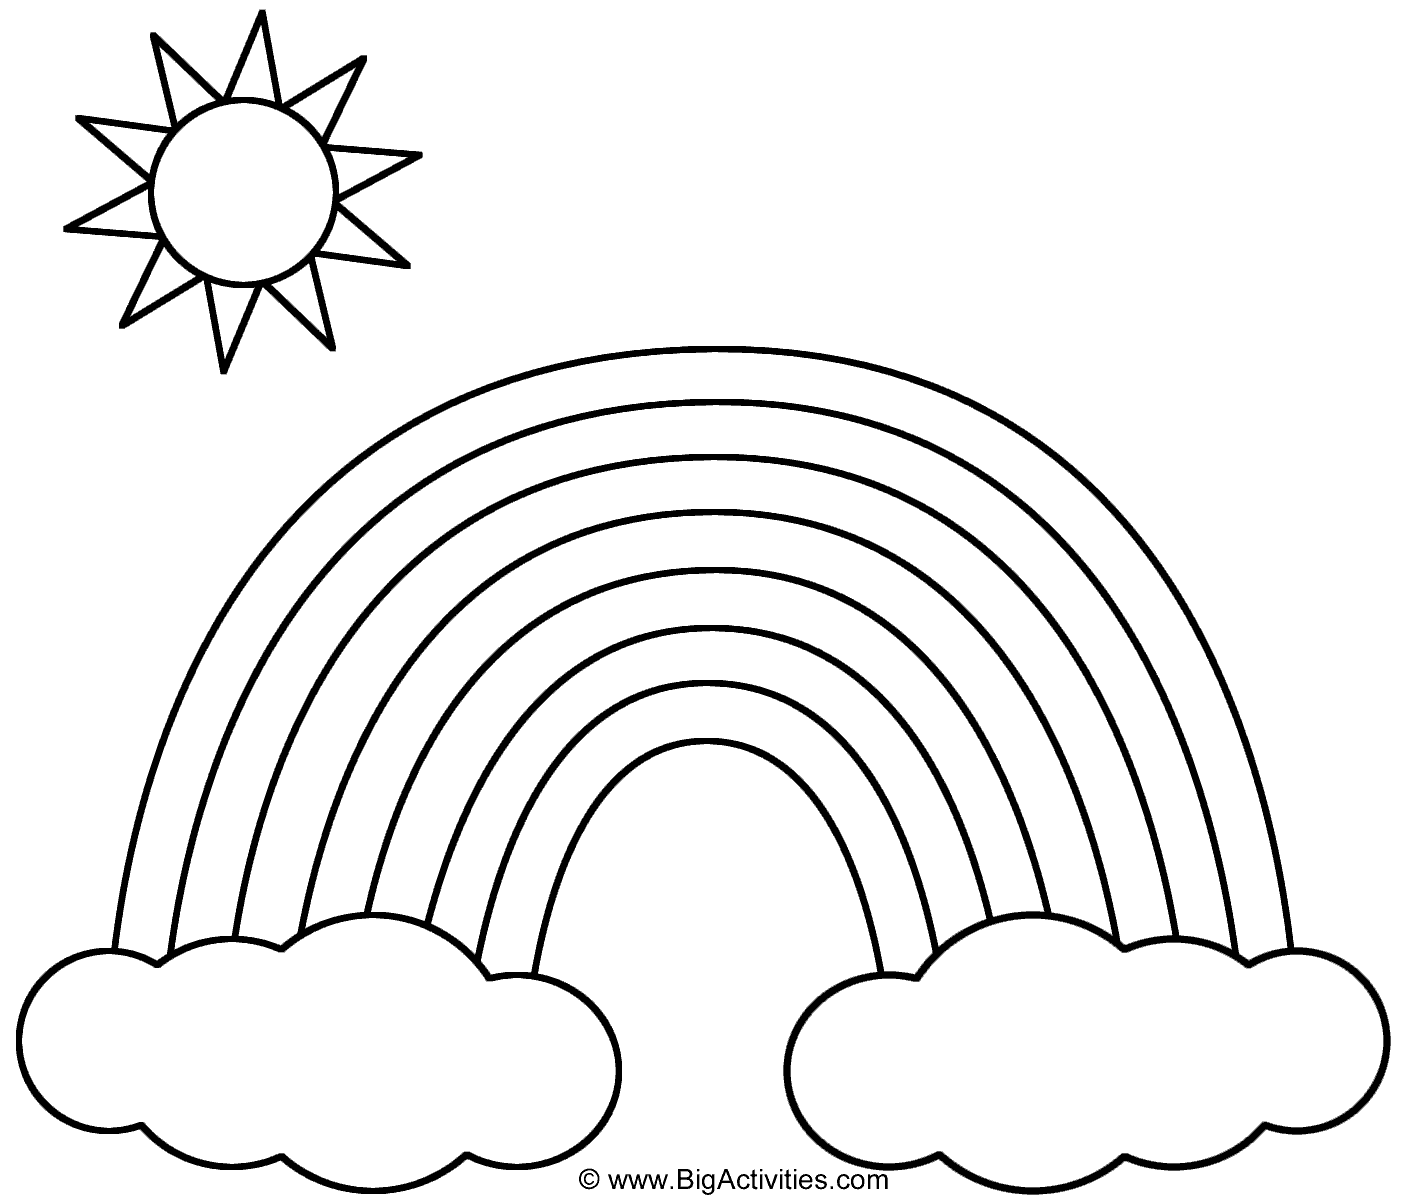 Rainbow With Clouds And Sun Coloring Page Nature